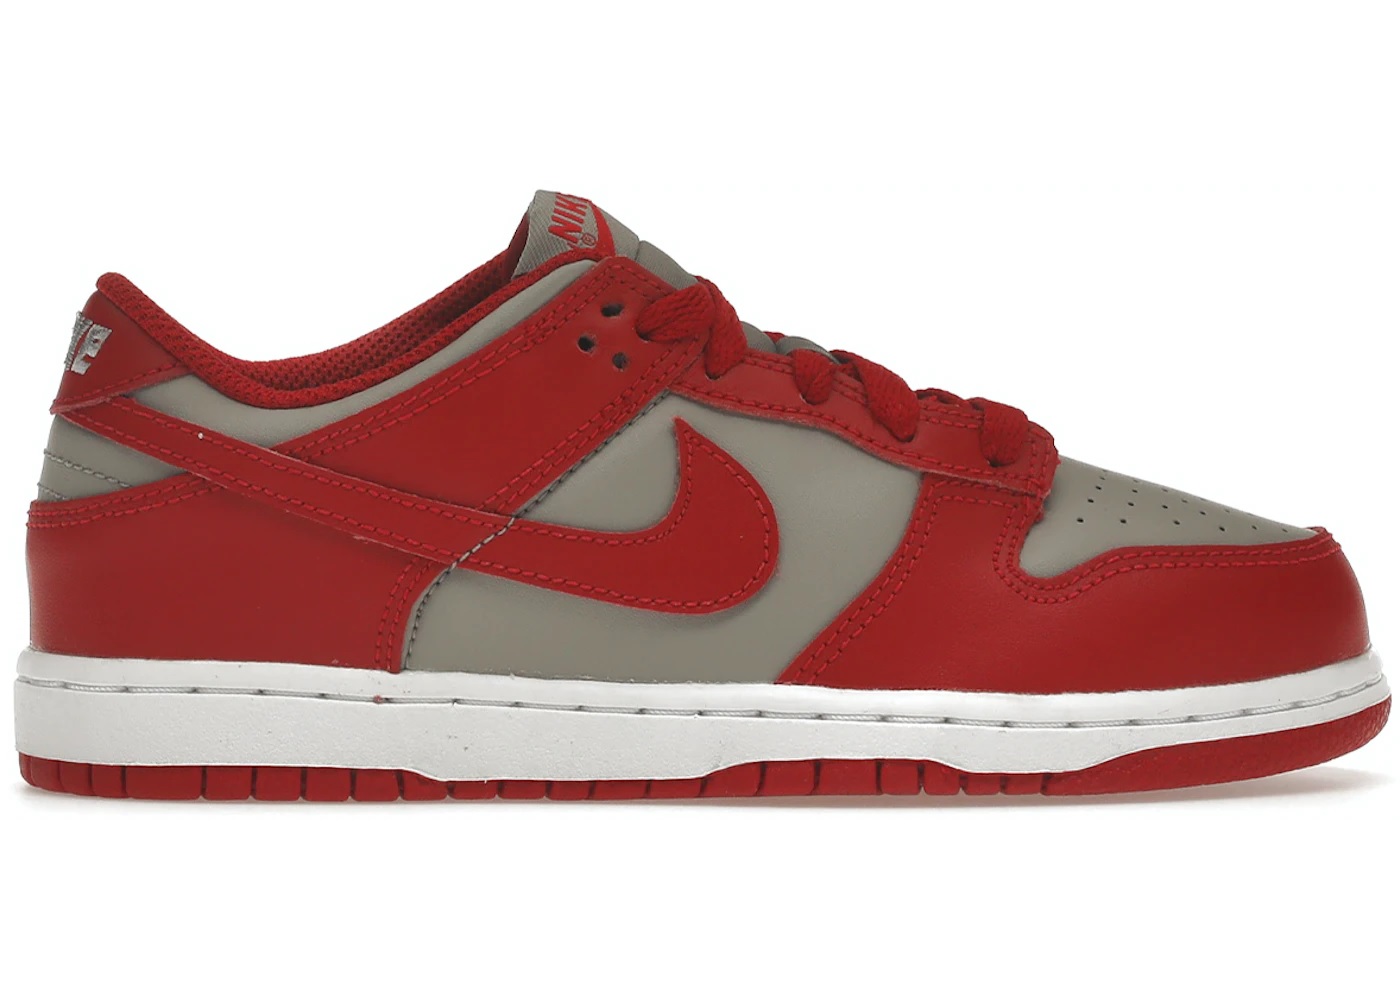 Nike Dunk Low UNLV (PS)